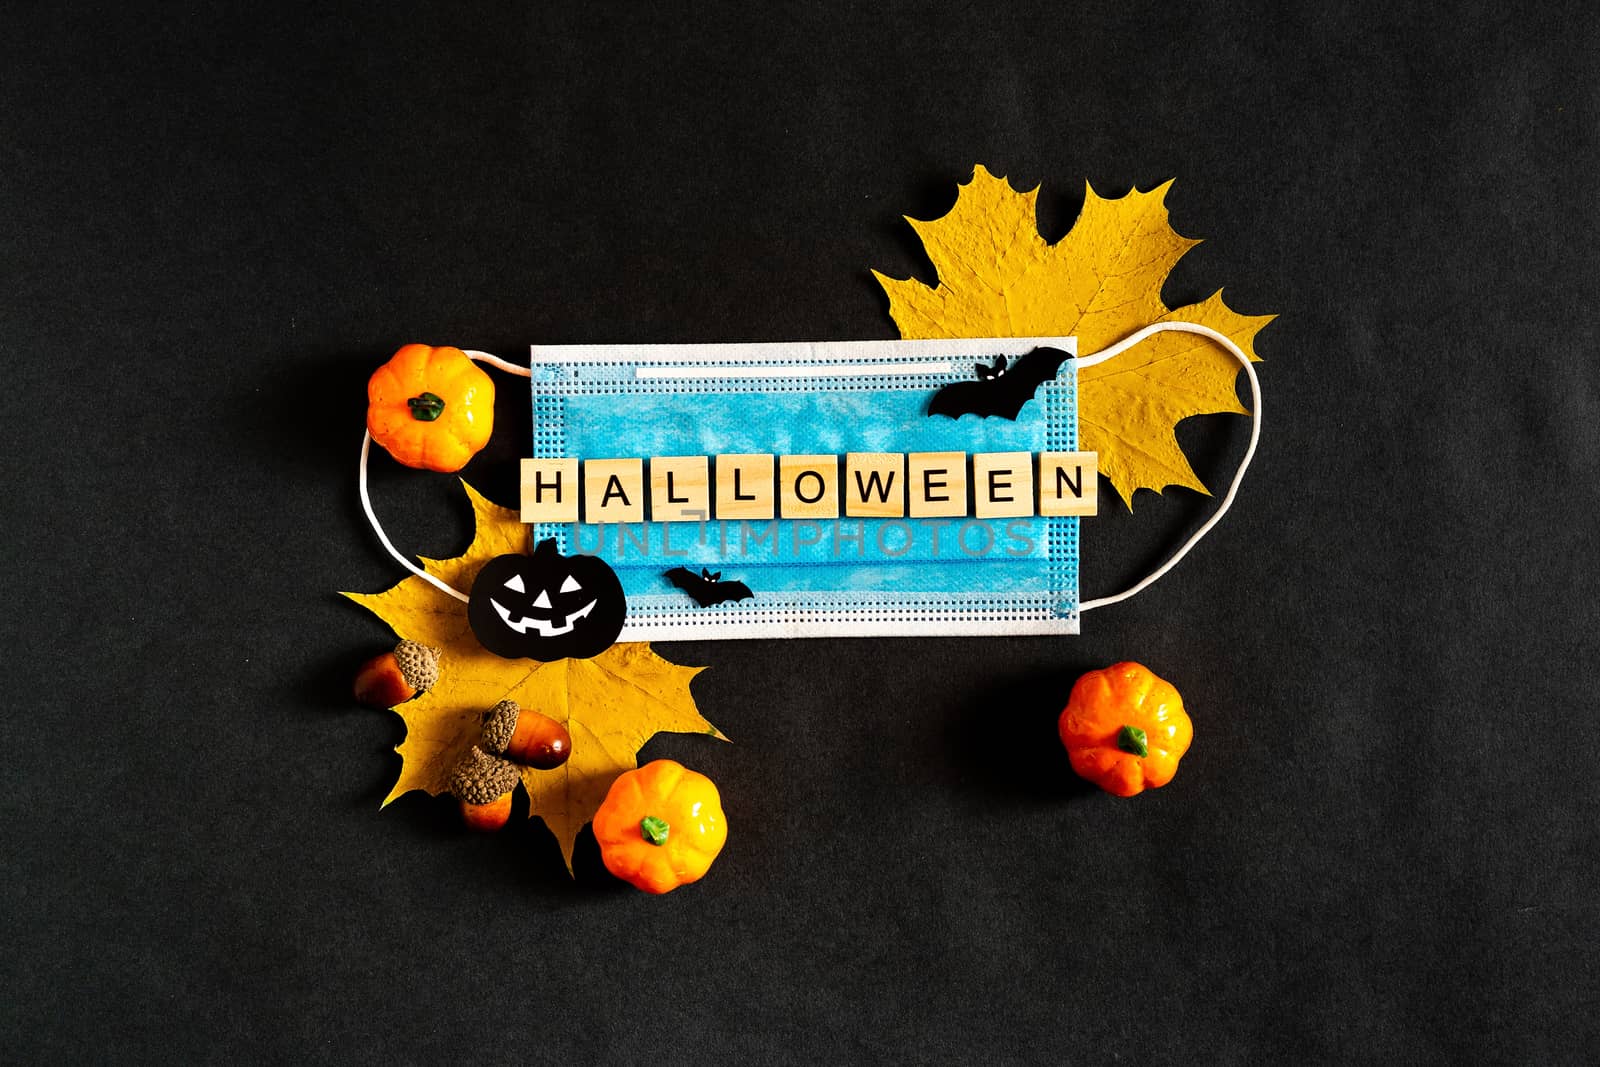 Halloween pumpkins, protective medical mask and yellow maple leaves on a black background, bats made of black paper. The inscription HALLOWEEN The concept of Halloween and covid-19. Flatlay.